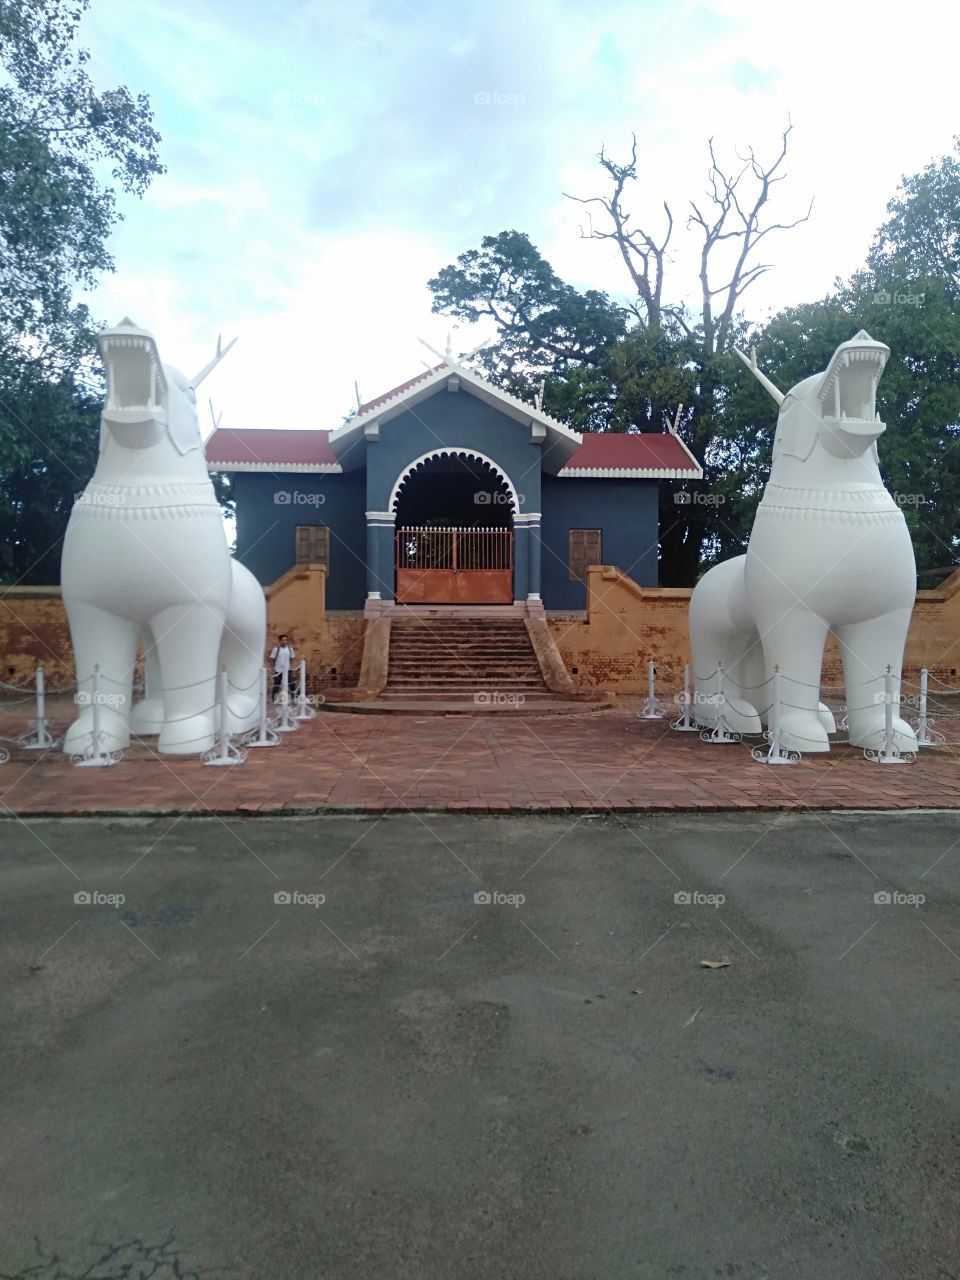 KANGLA  SHA ( Kangla Animals) inside the Kangla, an ancient palace of the Meitei Kingdom, in the heart of the Imphal City, the  capital of Manipur, a state in India.